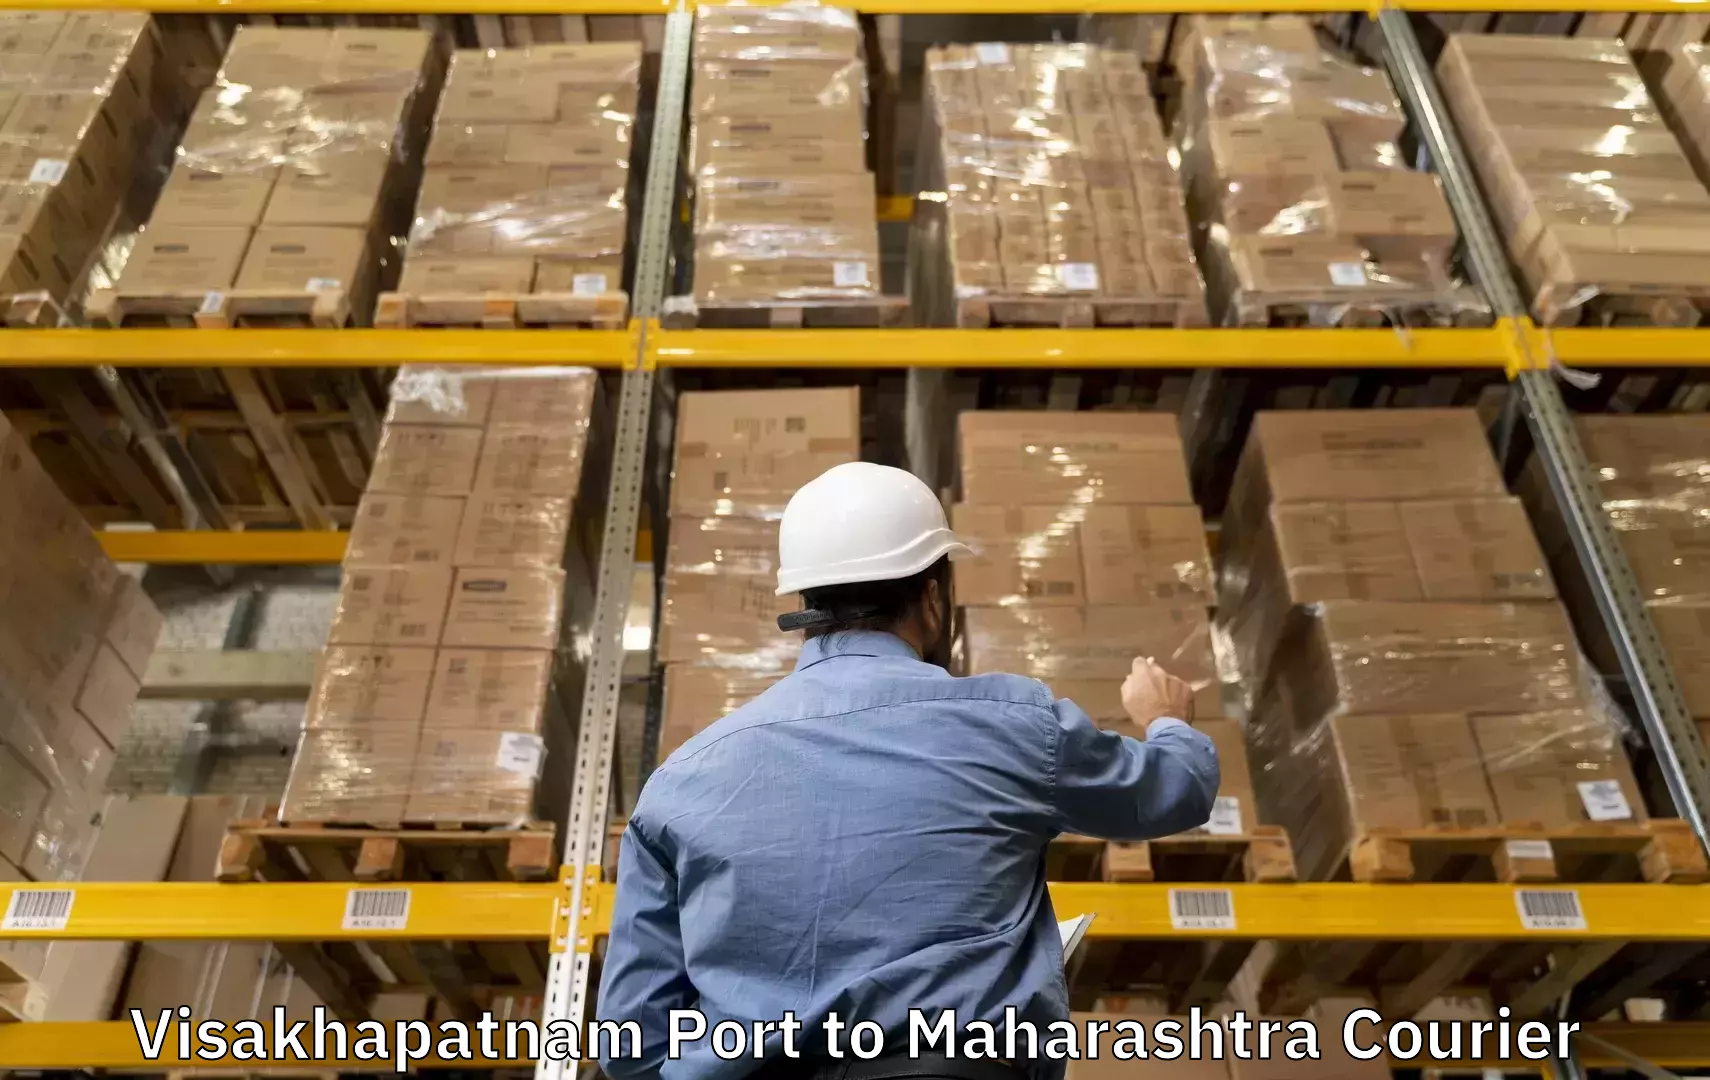 Tailored baggage transport in Visakhapatnam Port to Junnar